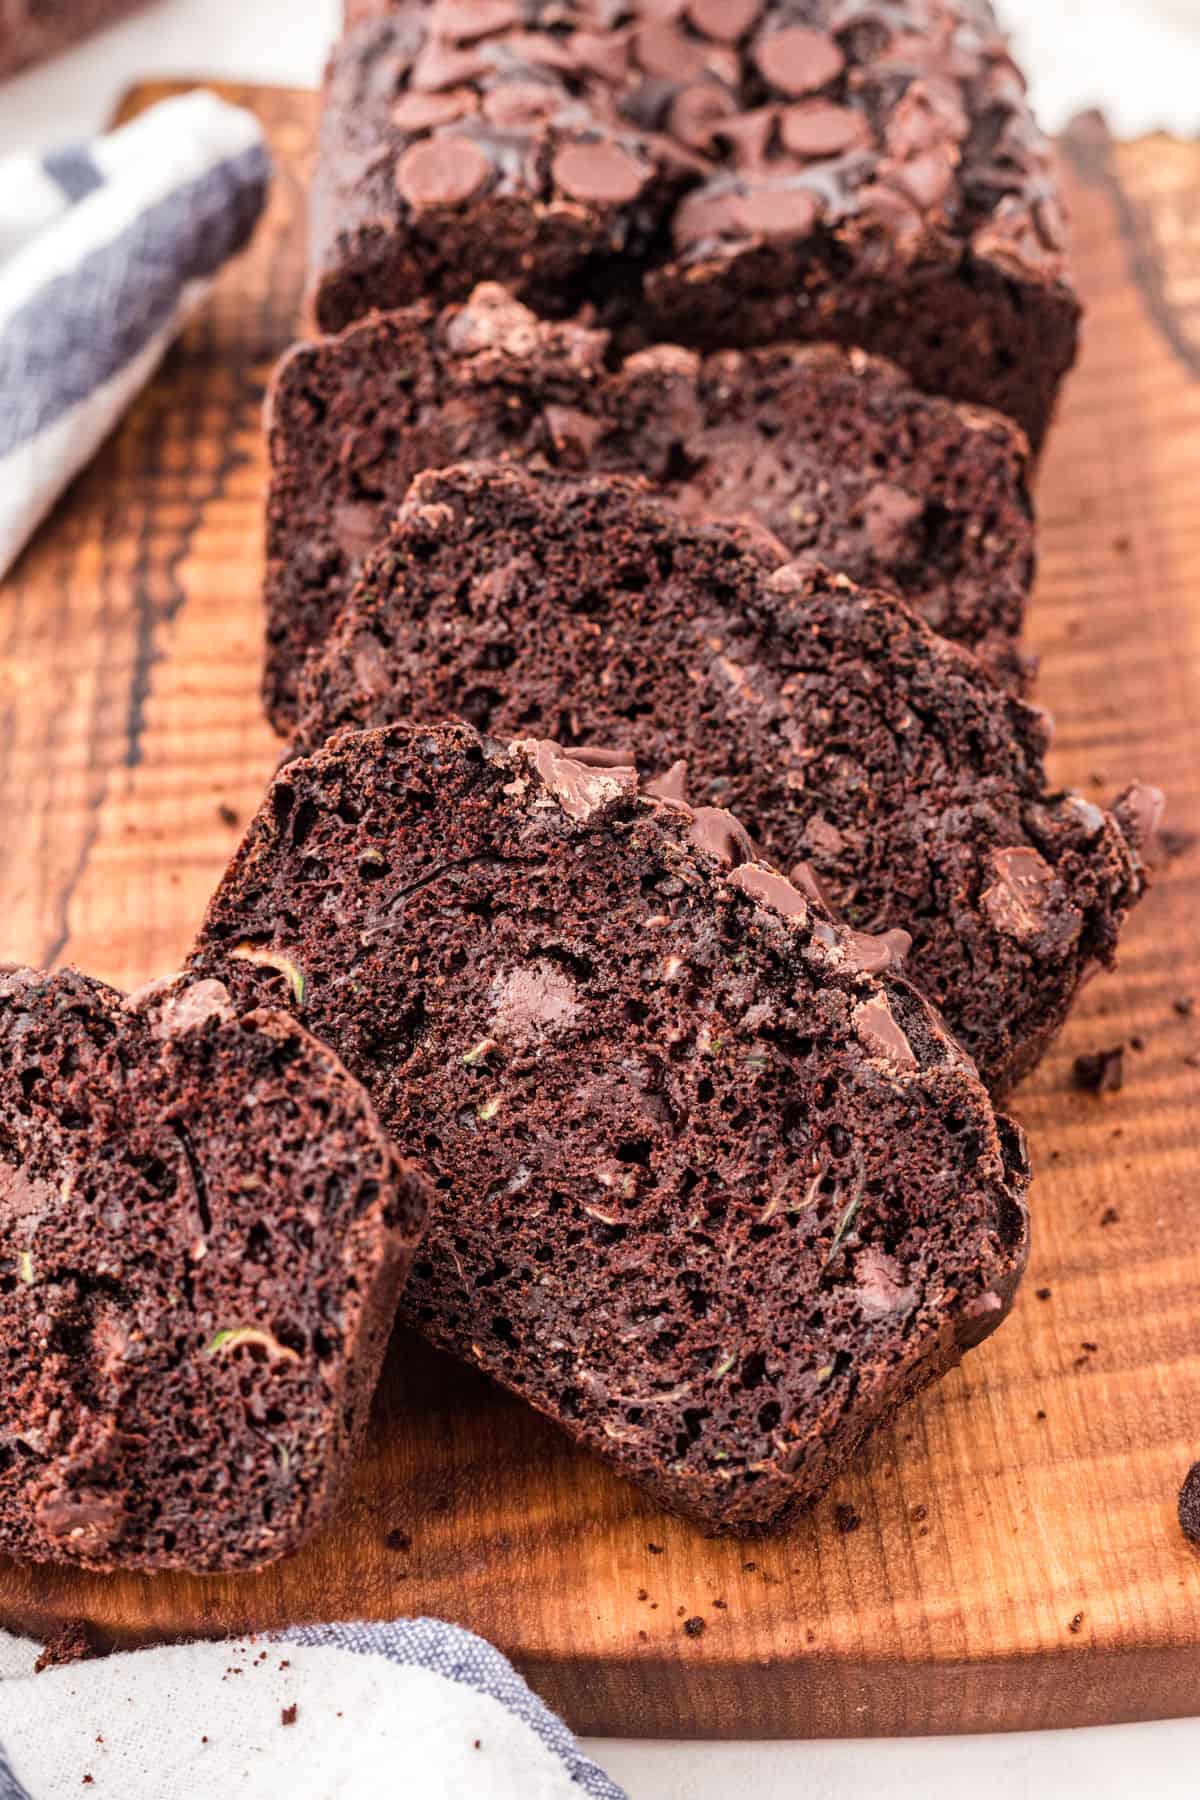 Loaf of chocolate zucchini bread on wooden cutting board cut into slices.